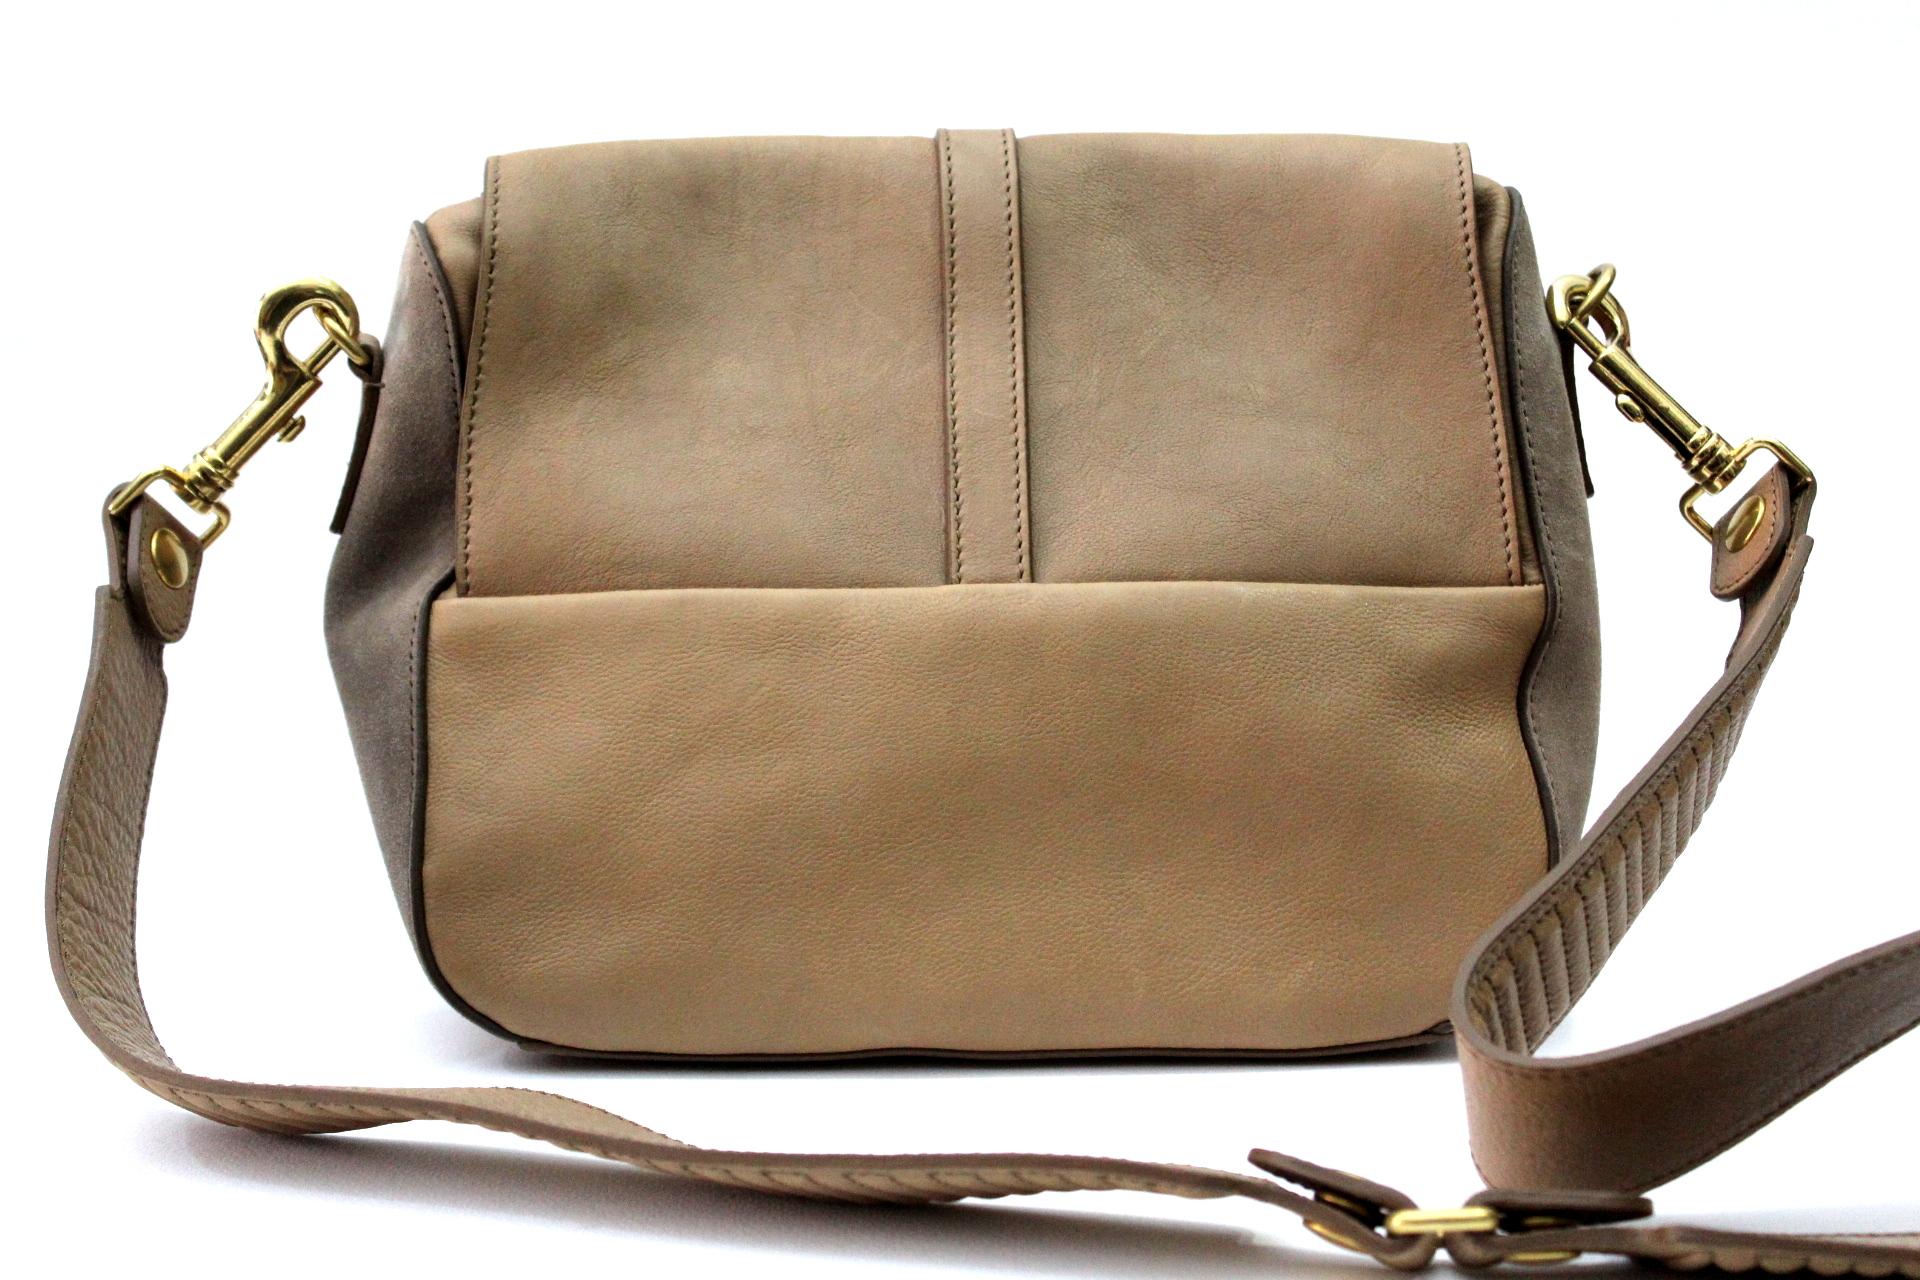 Cèline handbag in camel colored leather and suede, with gold hardware.
Closure with hook.Internally discreetly large and equipped with pockets.
Wearable on the shoulder or shoulder strap thanks to the leather shoulder strap.

CONDITIONS LIKE NEW!